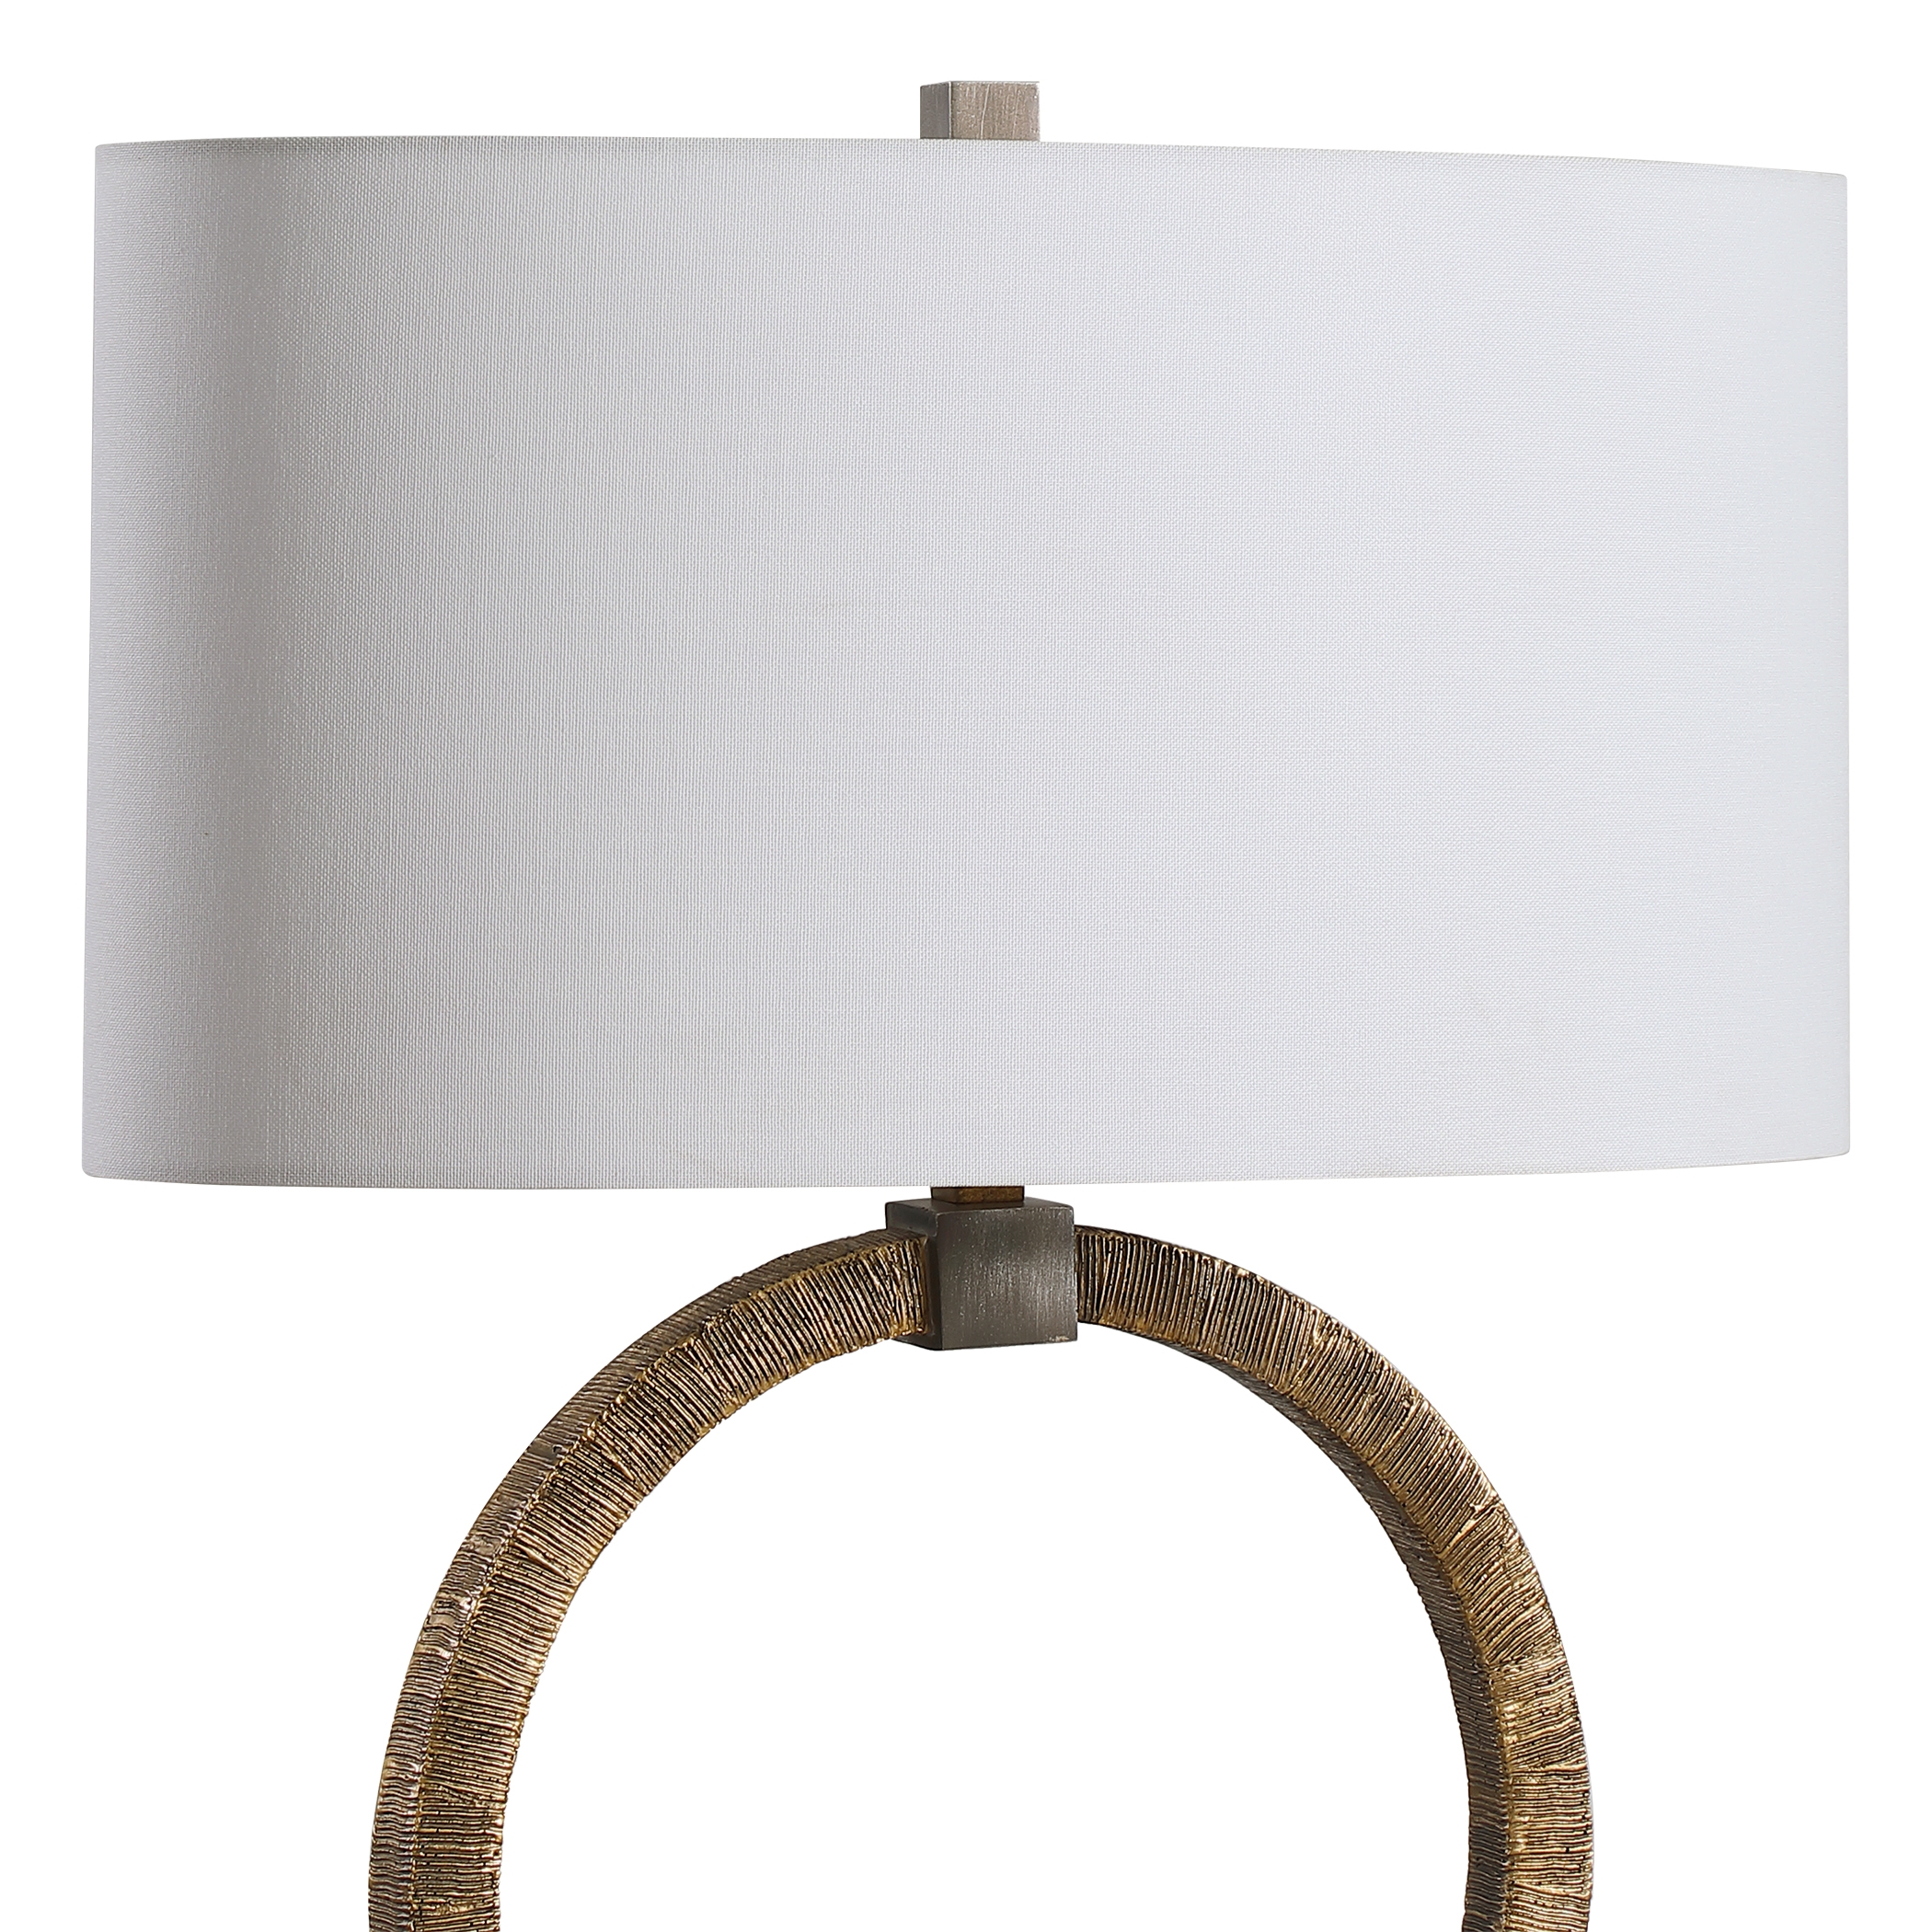 Relic Aged Gold Table Lamp - Image 3